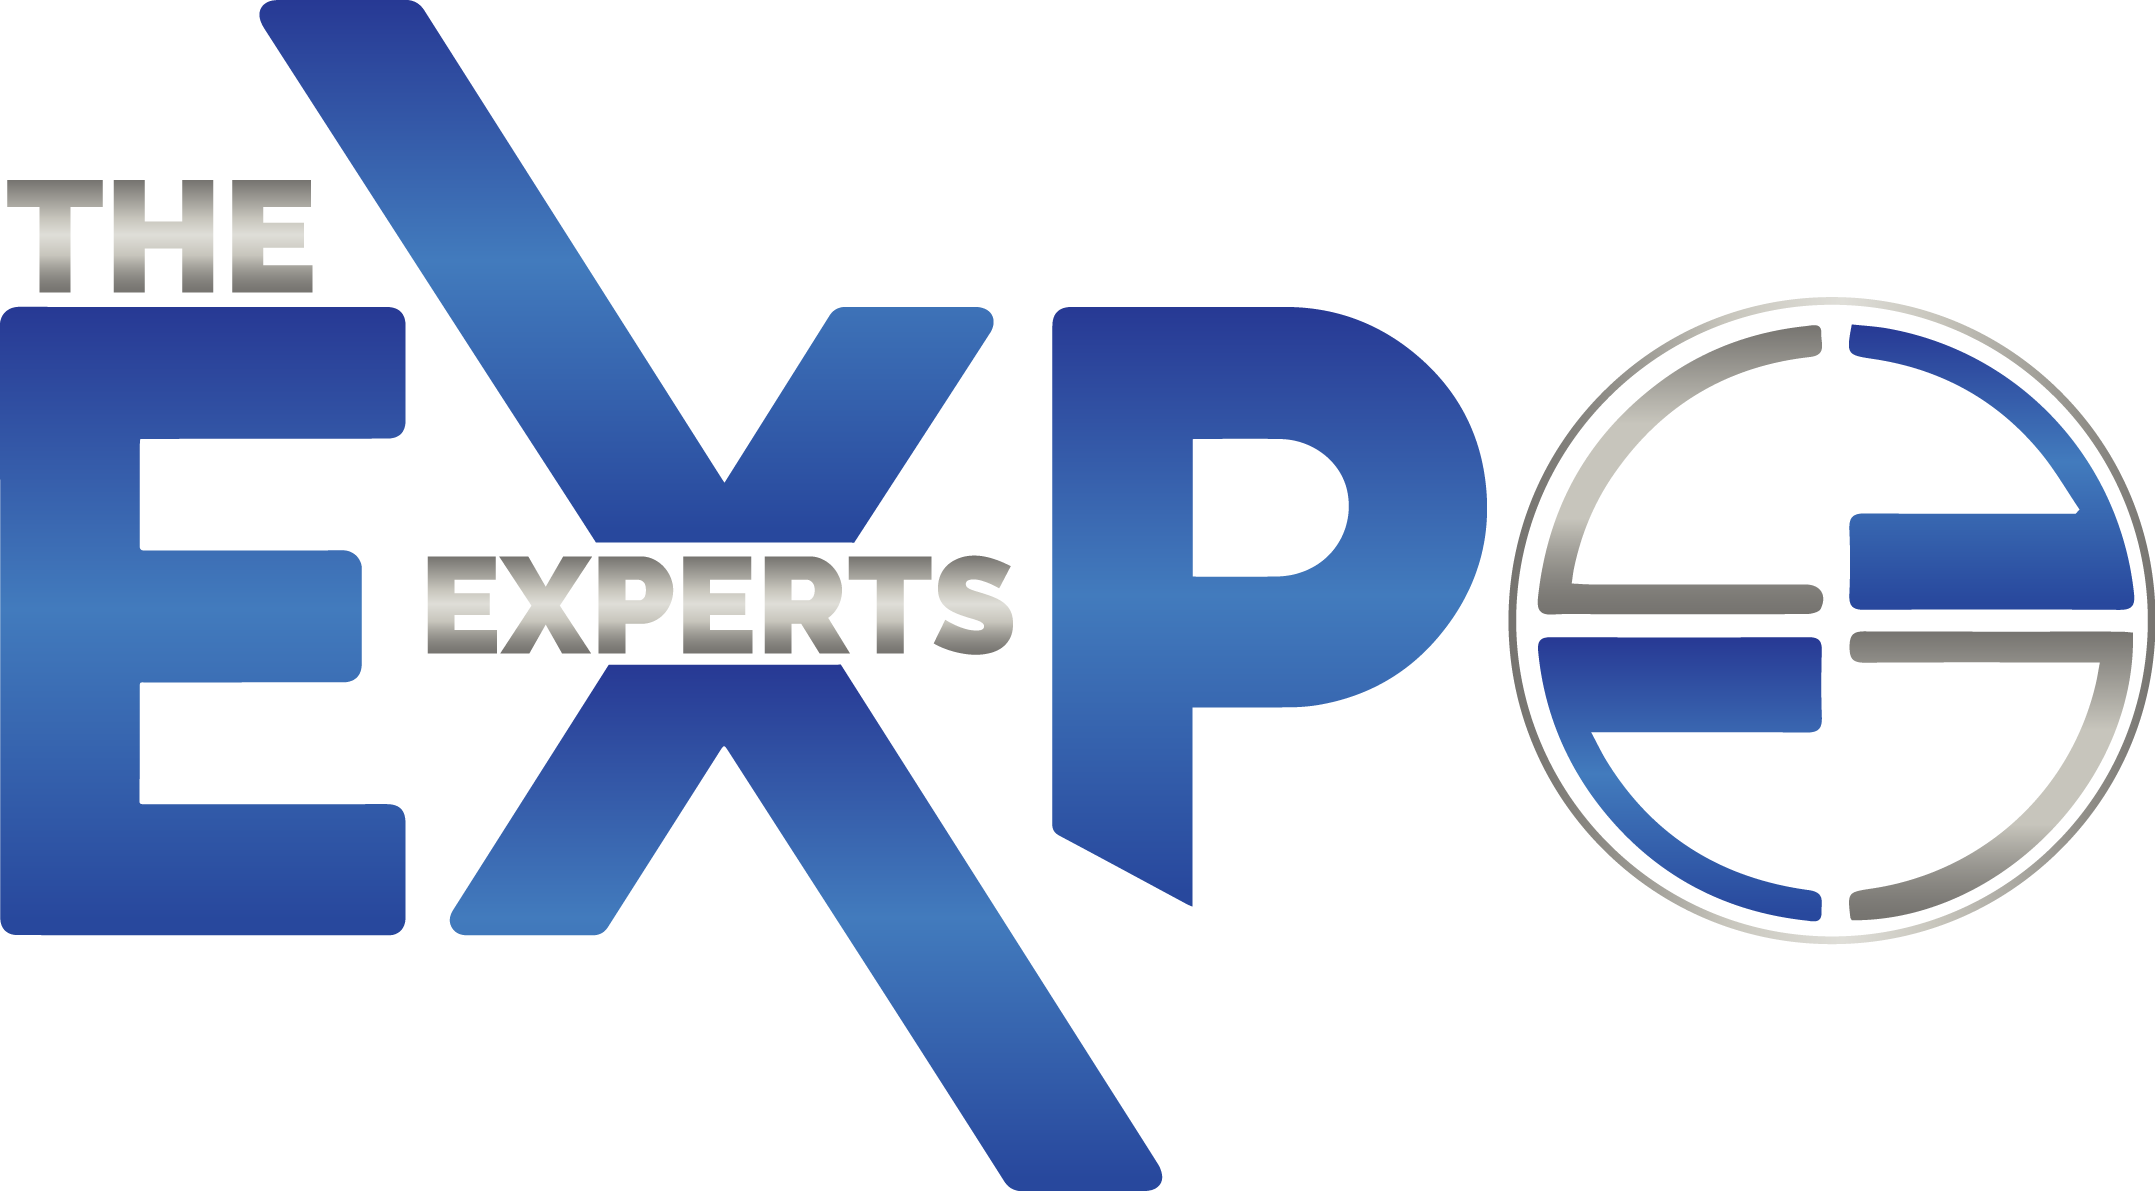 When it Comes to Shows, Expos, and Events...WE ARE THE EXPERTS!